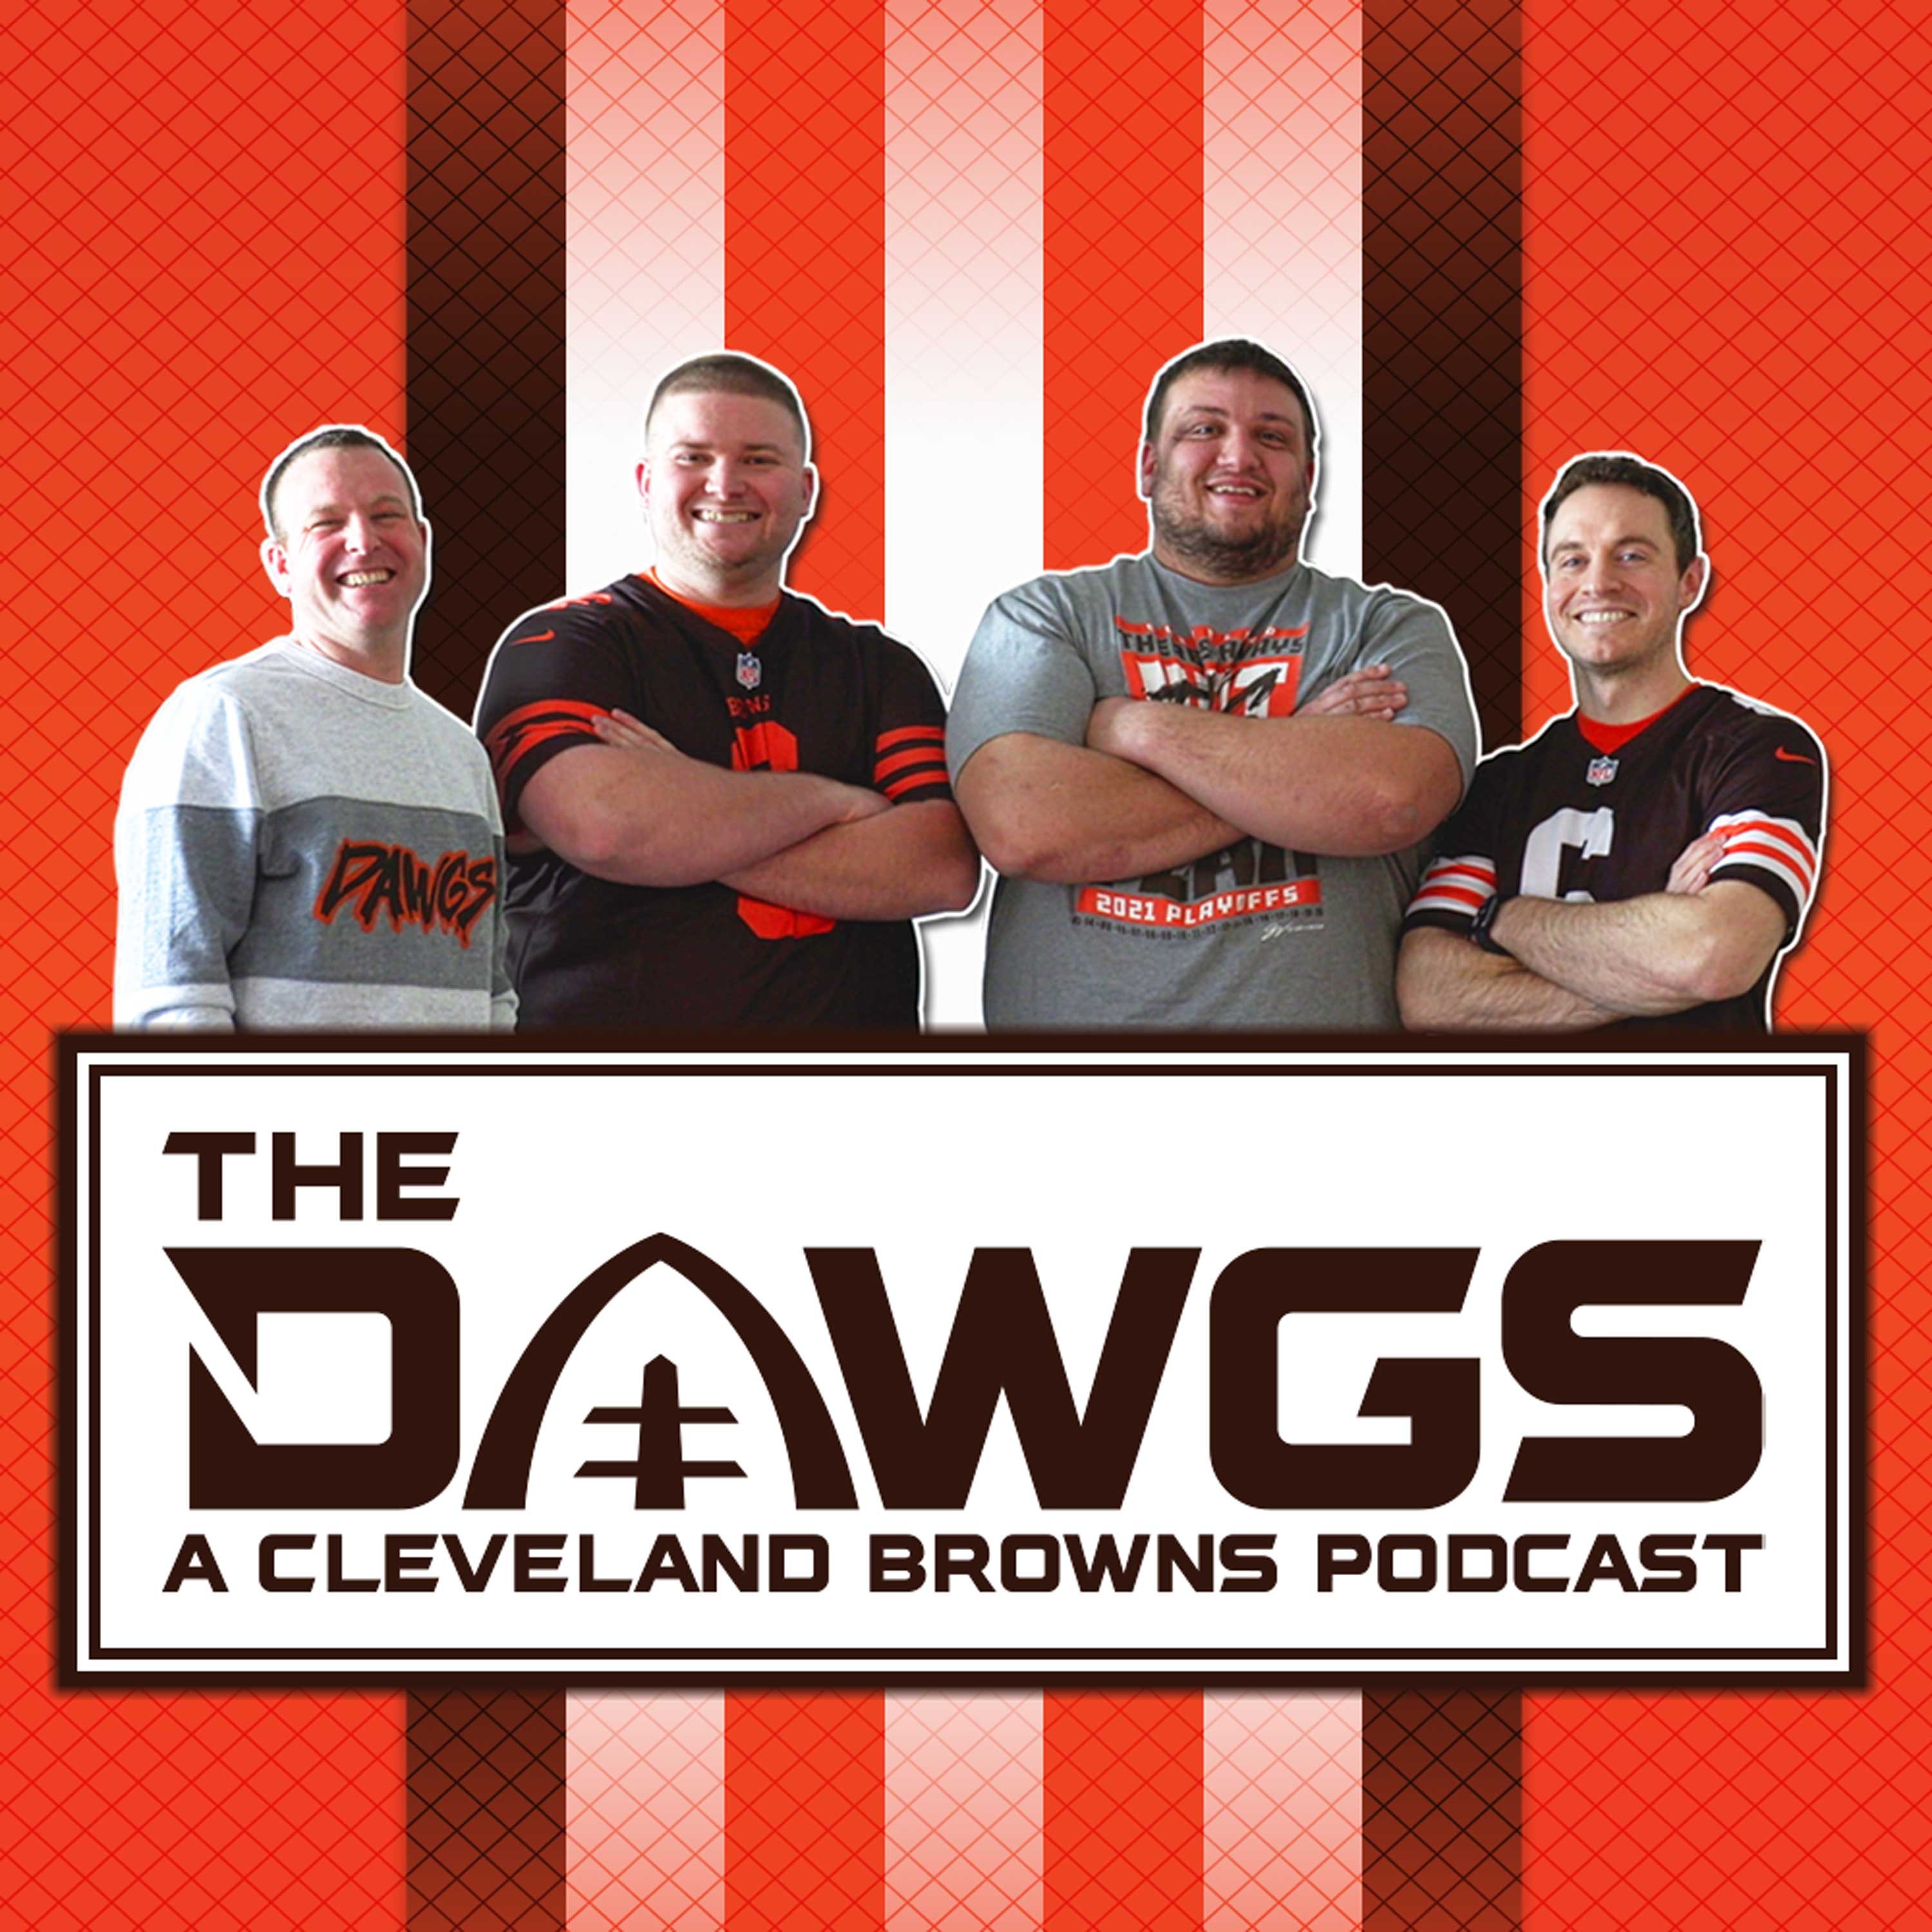 Aloha, Browns Fans! Hats Off to Heroes with the Honolulu Hawaii Browns Backers | The Dawgs - A Cleveland Browns Podcast - March 4, 2021